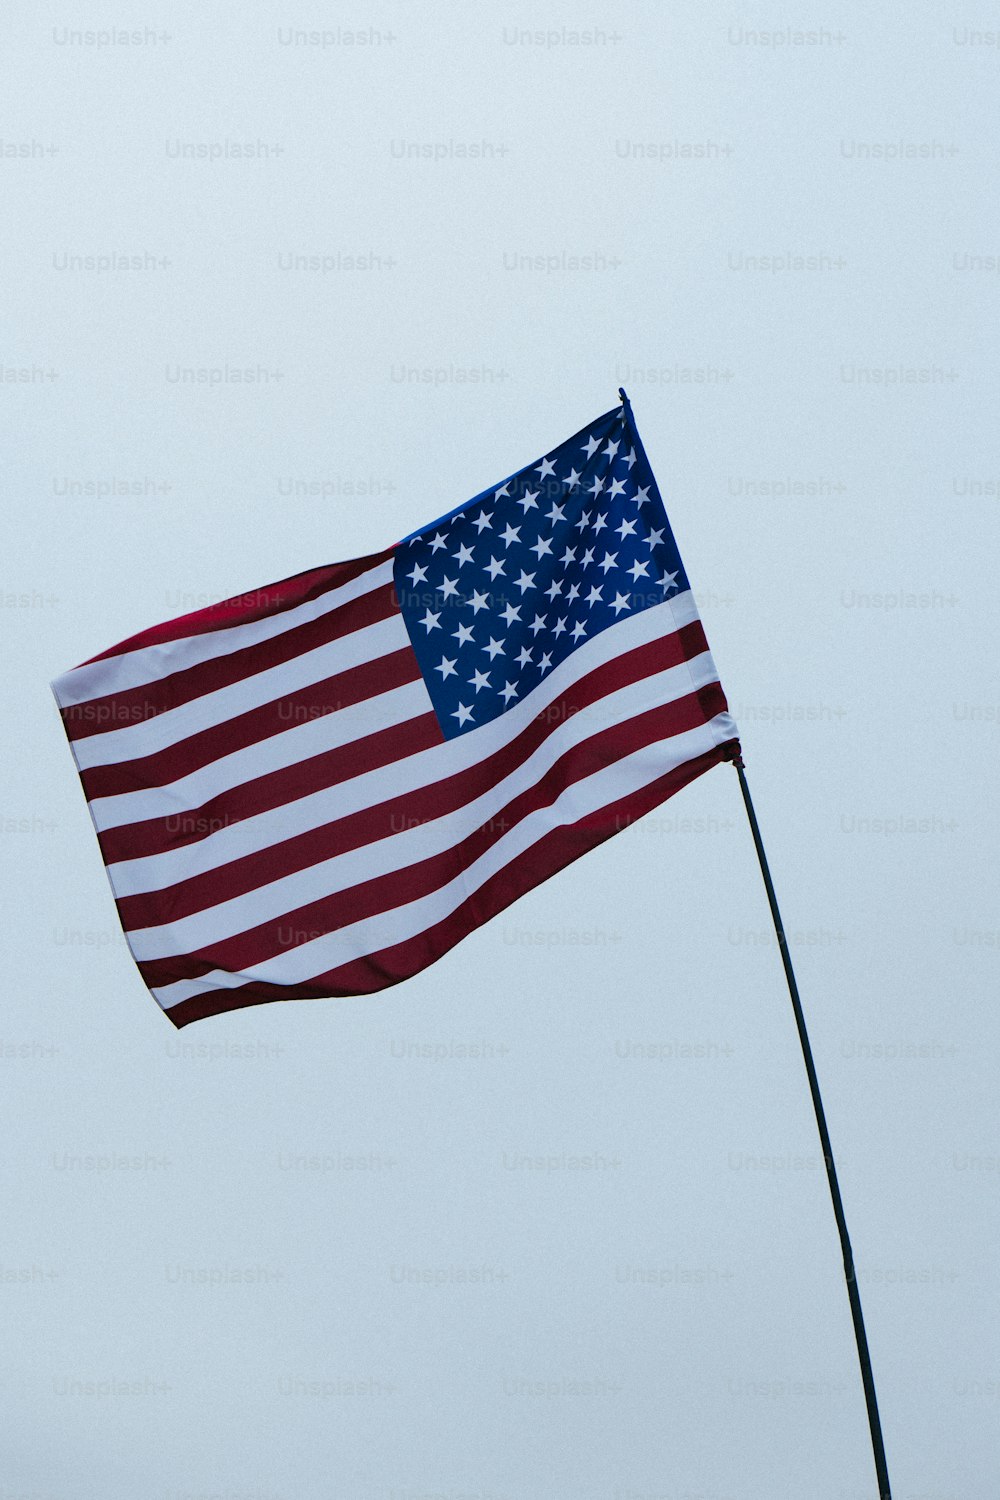 a large american flag flying in the sky